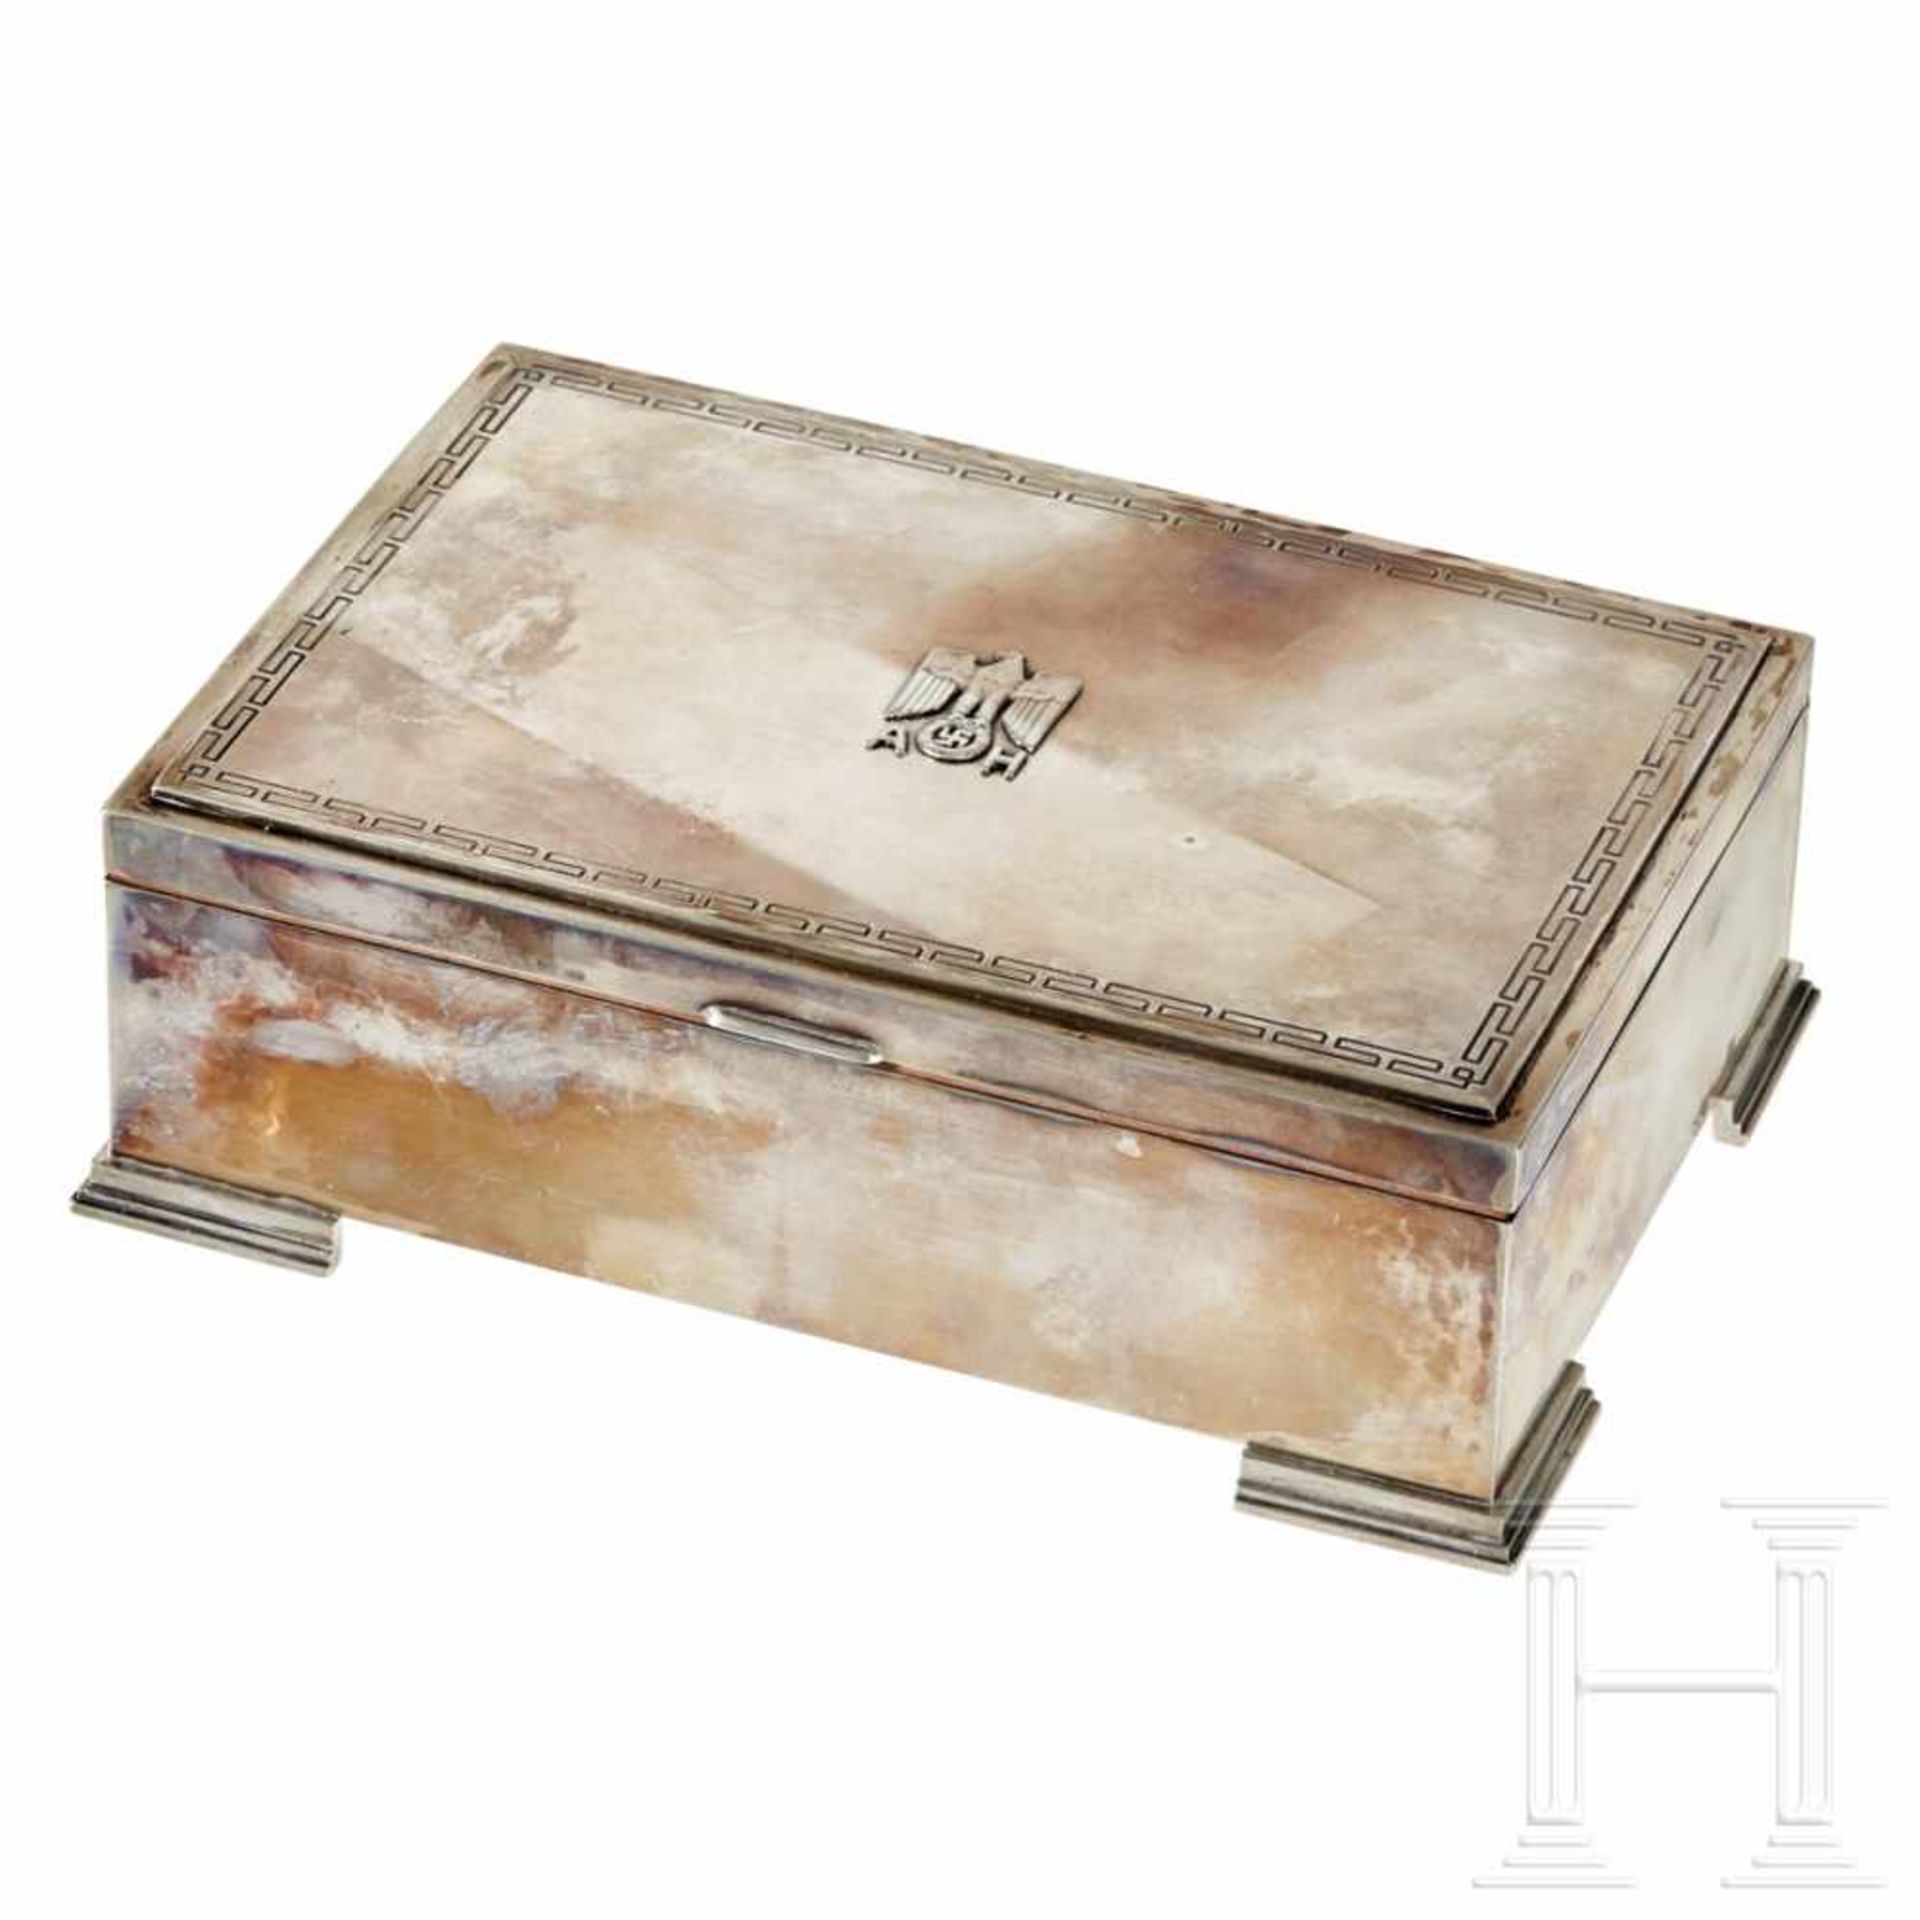 Adolf Hitler – a Cigar Box from his Personal Silver ServiceSilver with highly polished surfaces, a